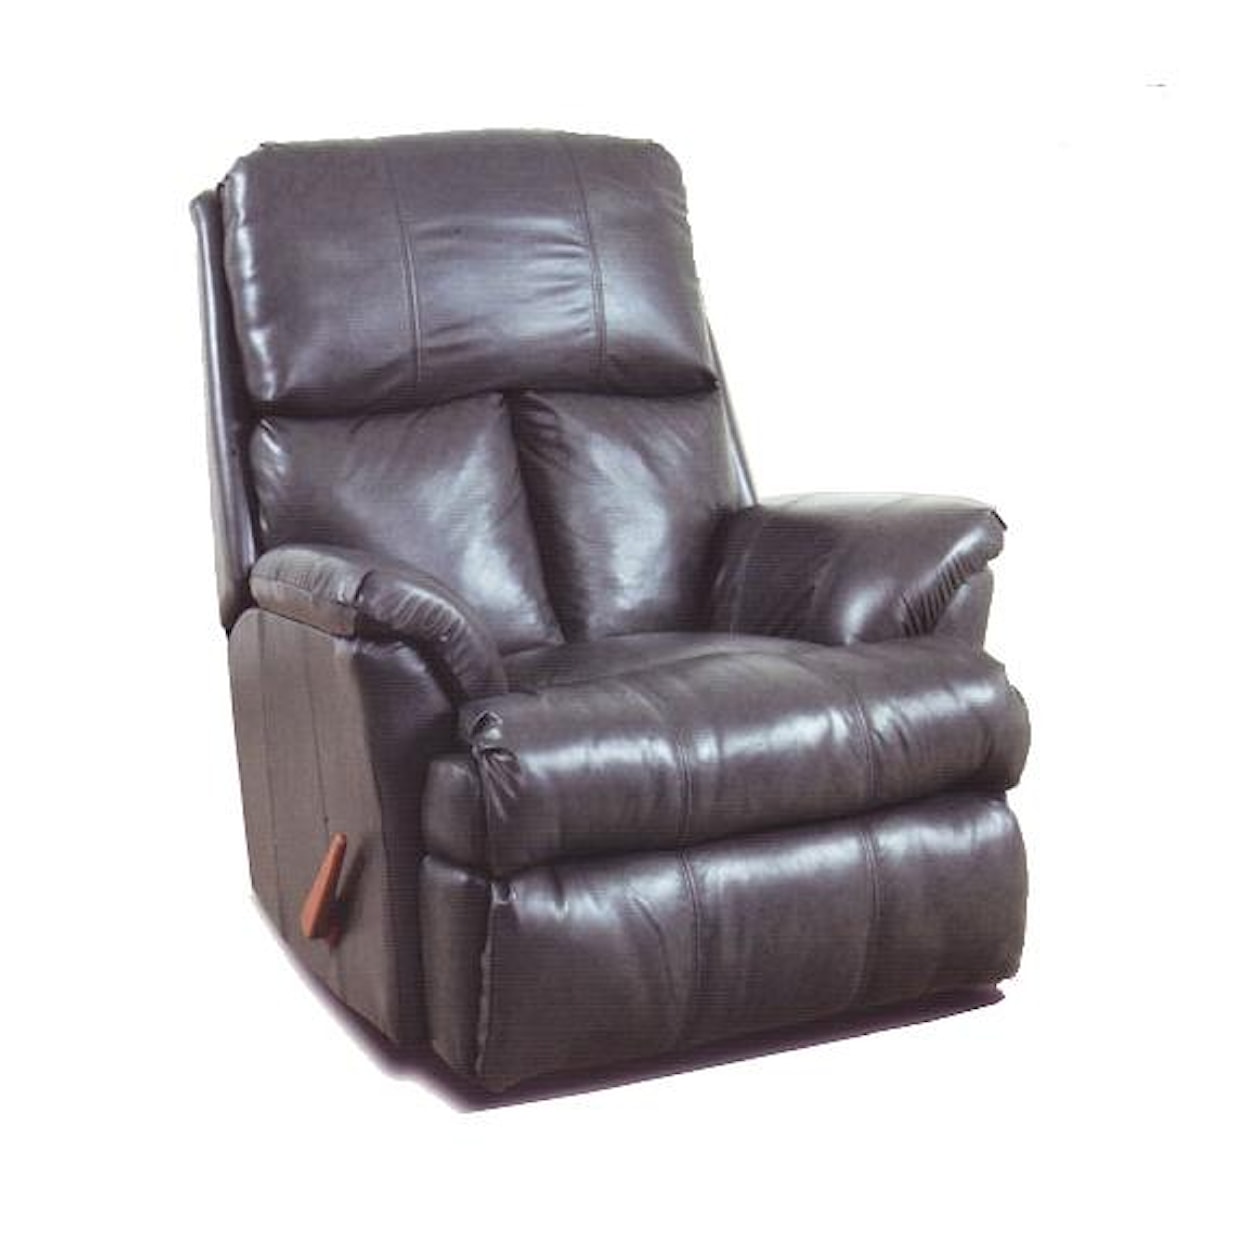 Ort Manufacturing Reserve Seating 100% Leather Chaise Rocker Recliner